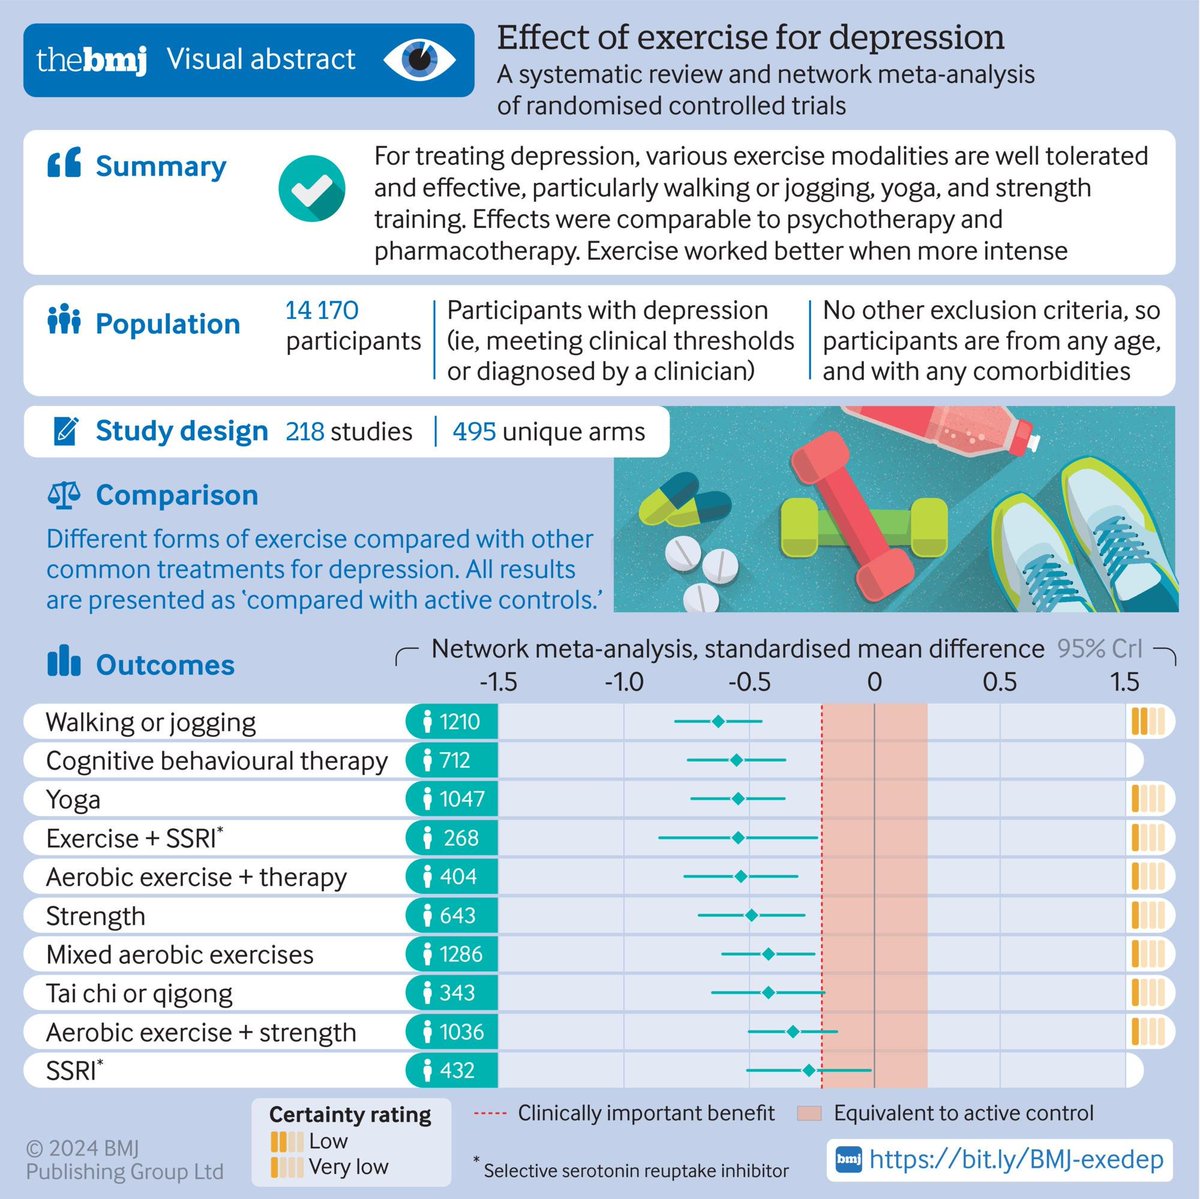 A major review of randomized trials analyzing the role that exercise can play in combating depression: bmj.com/content/384/bm… Summary: Exercise combats depression, and more exercise combats it more. The effects can be (at least) as large as pills. Please, look after yourself.